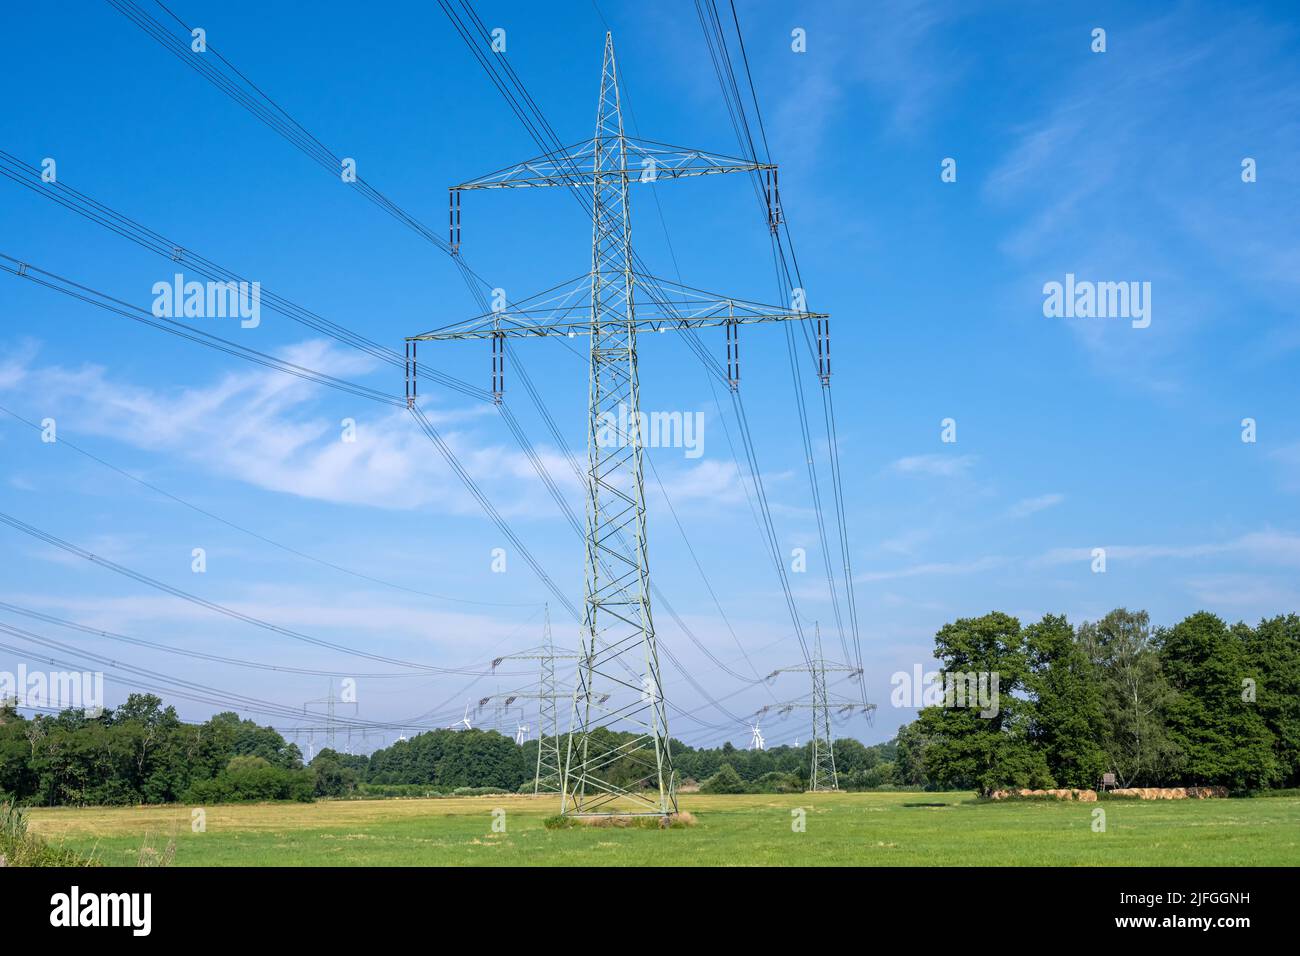 Electric power lines with a steel pylon seen in Germany Stock Photo